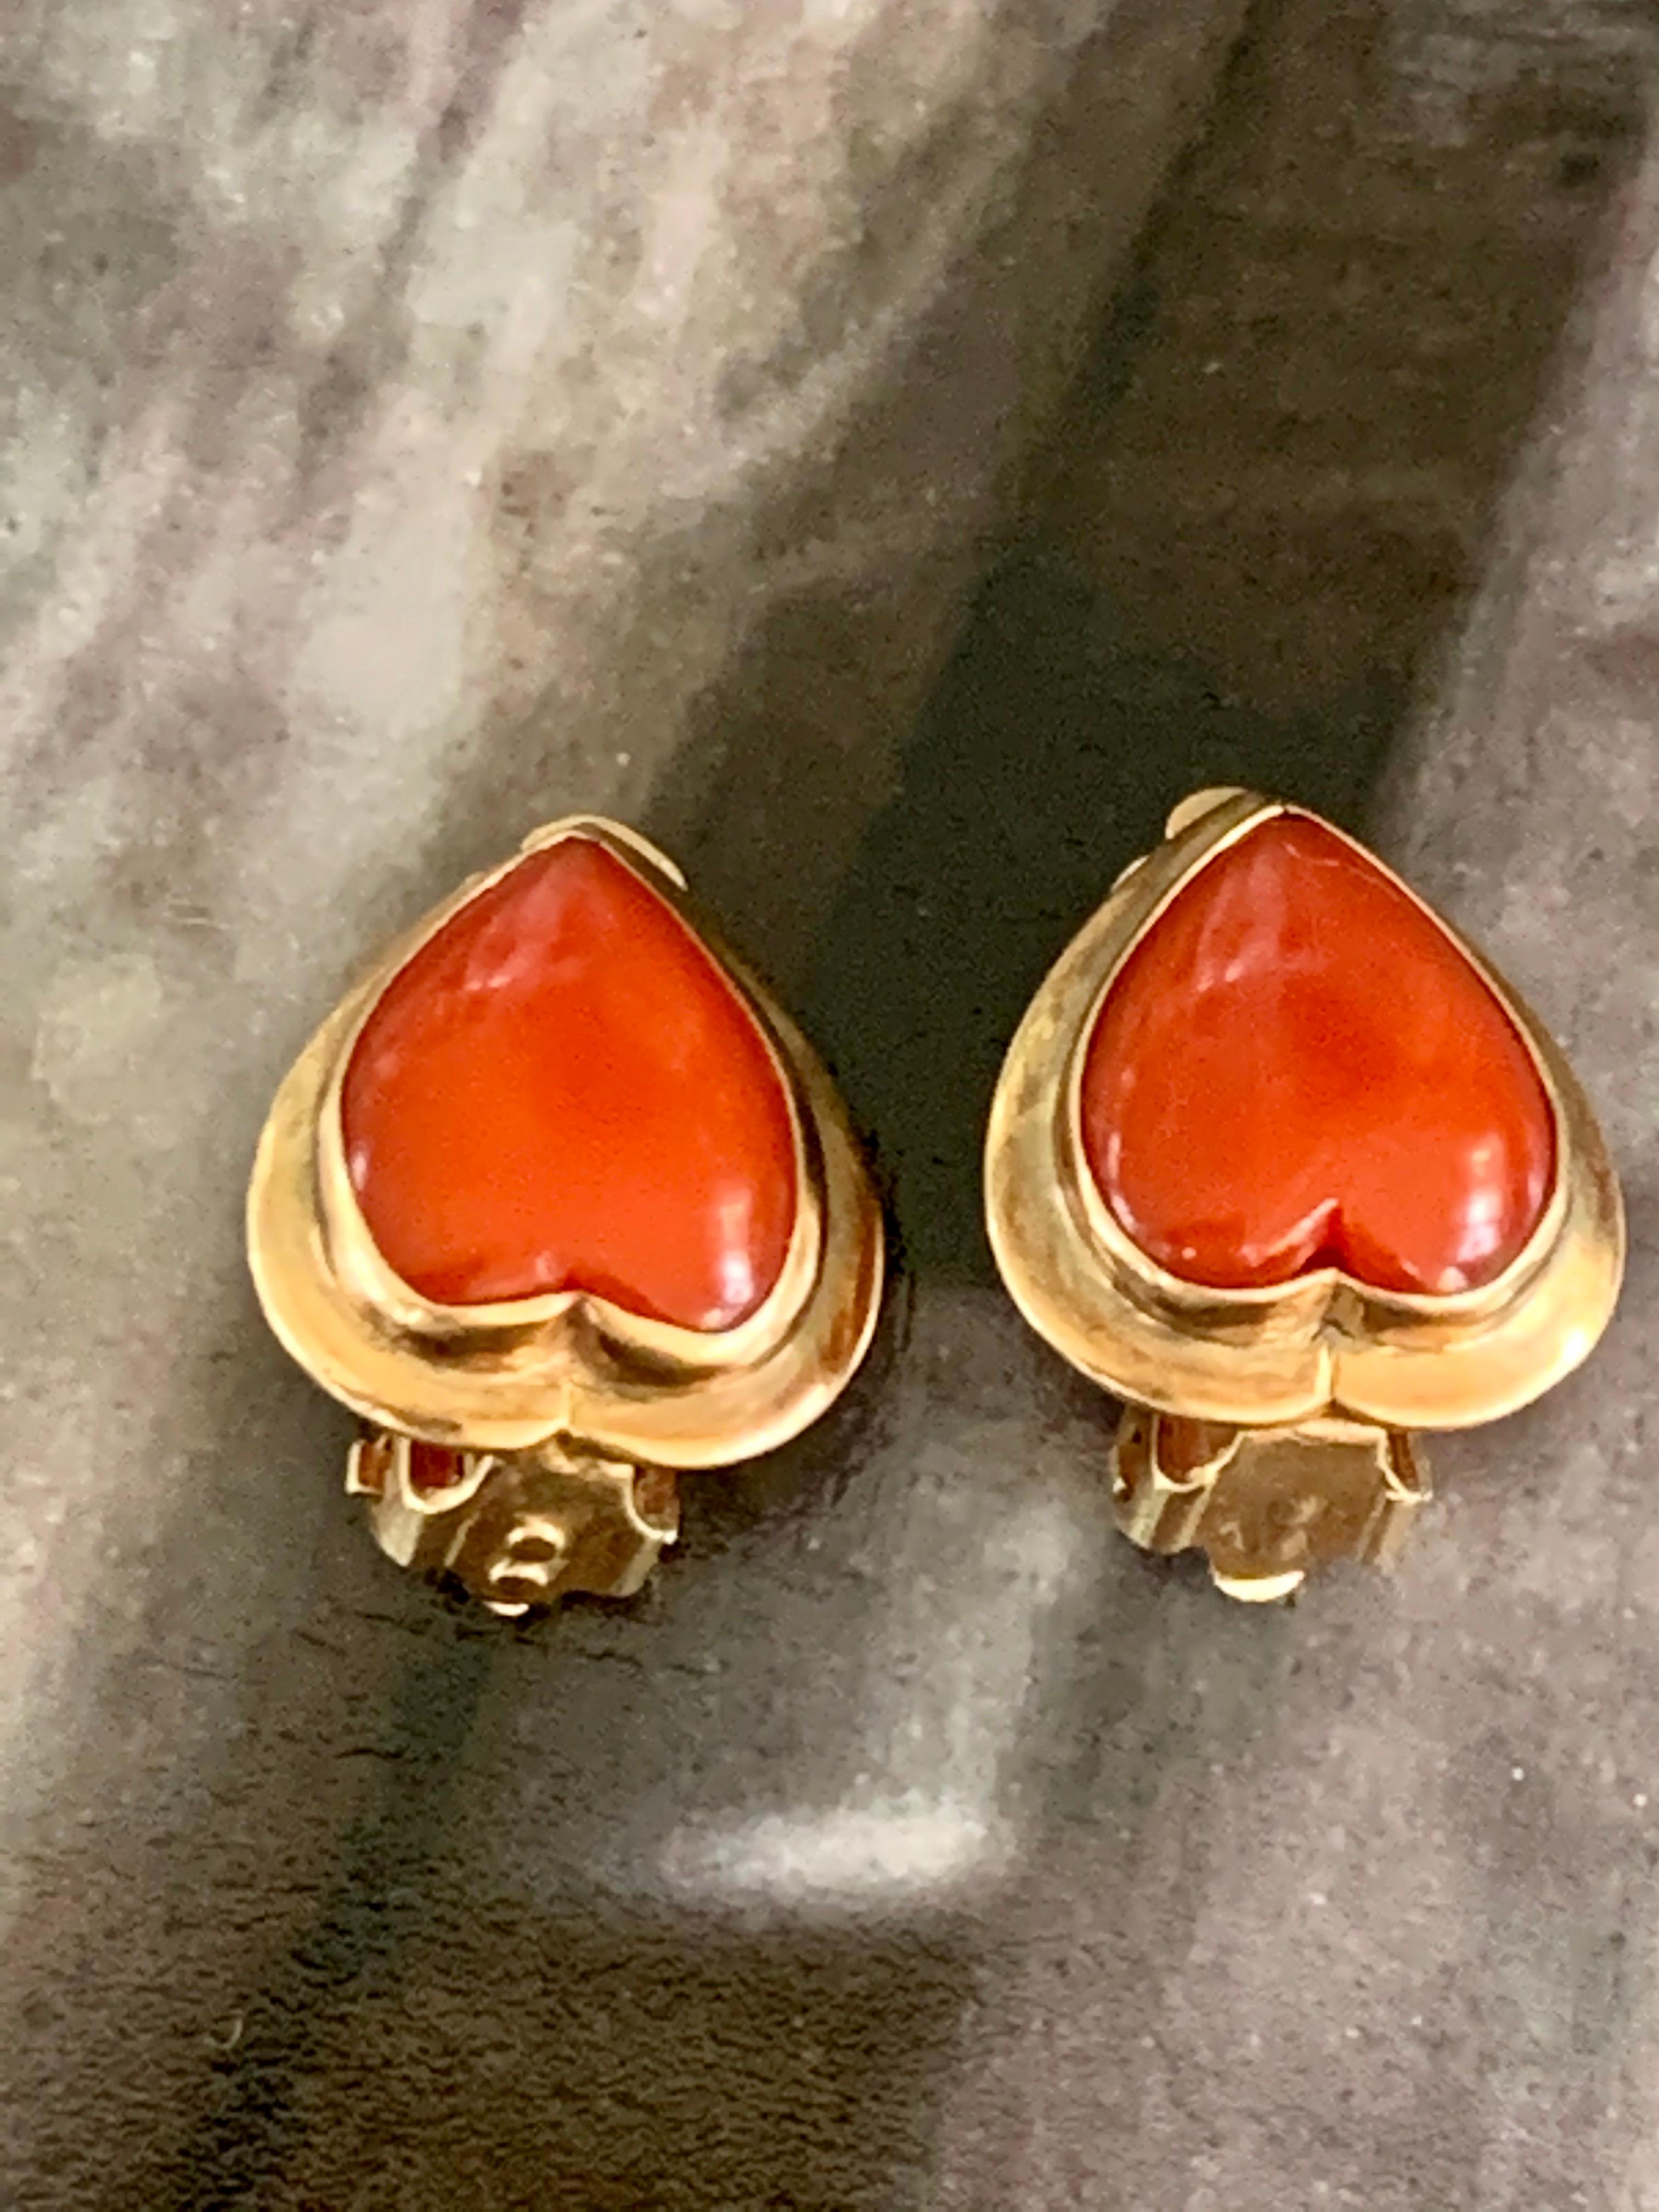 These lovely earrings, made by Ming's of Honolulu, feature an Oxblood Coral heart-shaped cabochon stone set in 14 karat yellow Gold.  They are .6